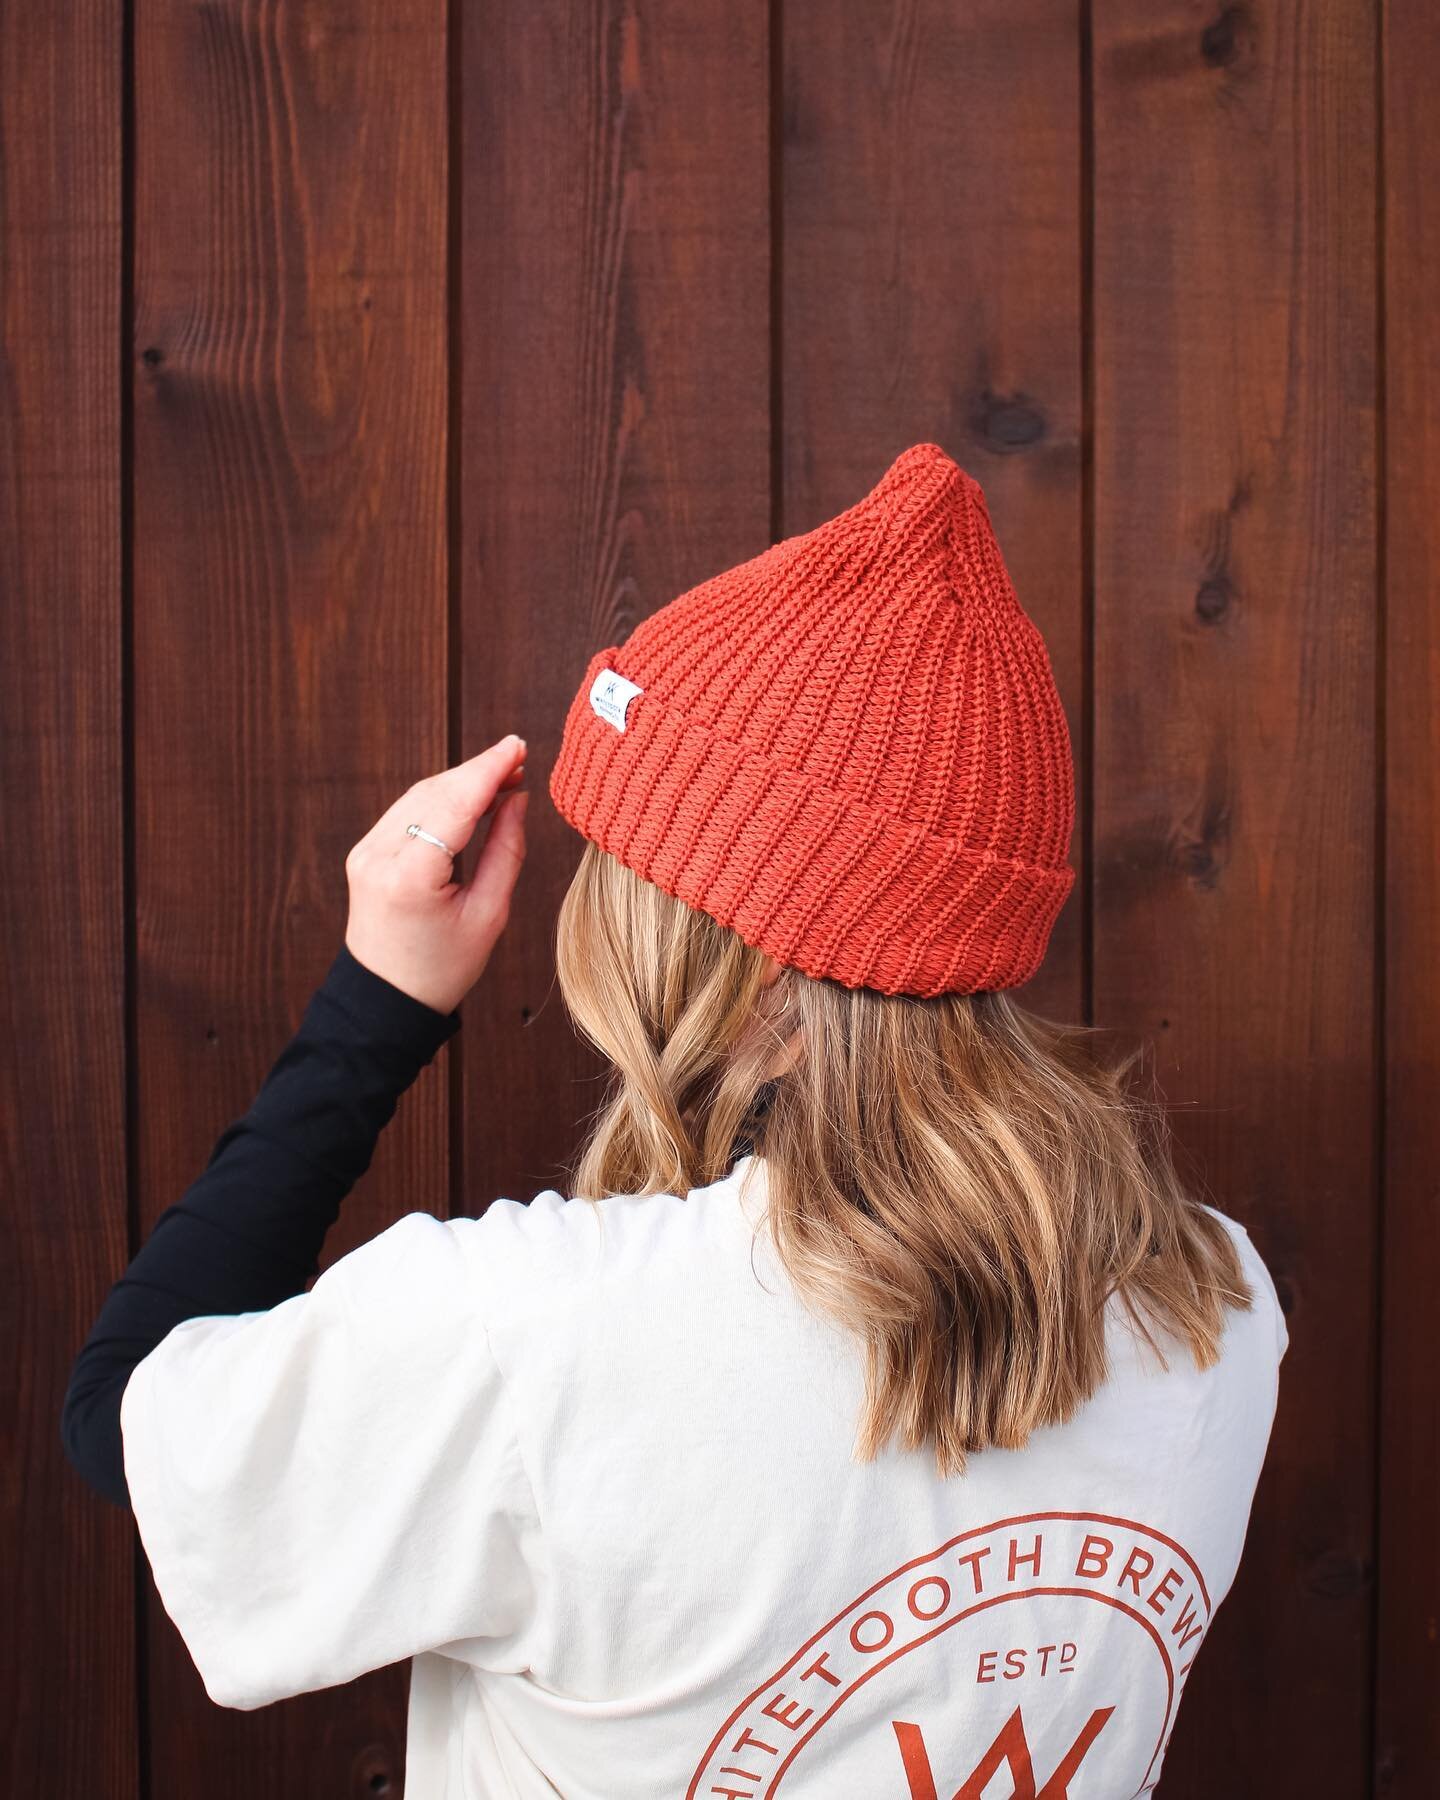 New toques in stock! 🔥 

A limited run of two different knits, each in two different colour-ways. Perfect for tossing on after shredding pow all day 😉

Get &lsquo;em while you can!

#newmerch #whitetoothbrew